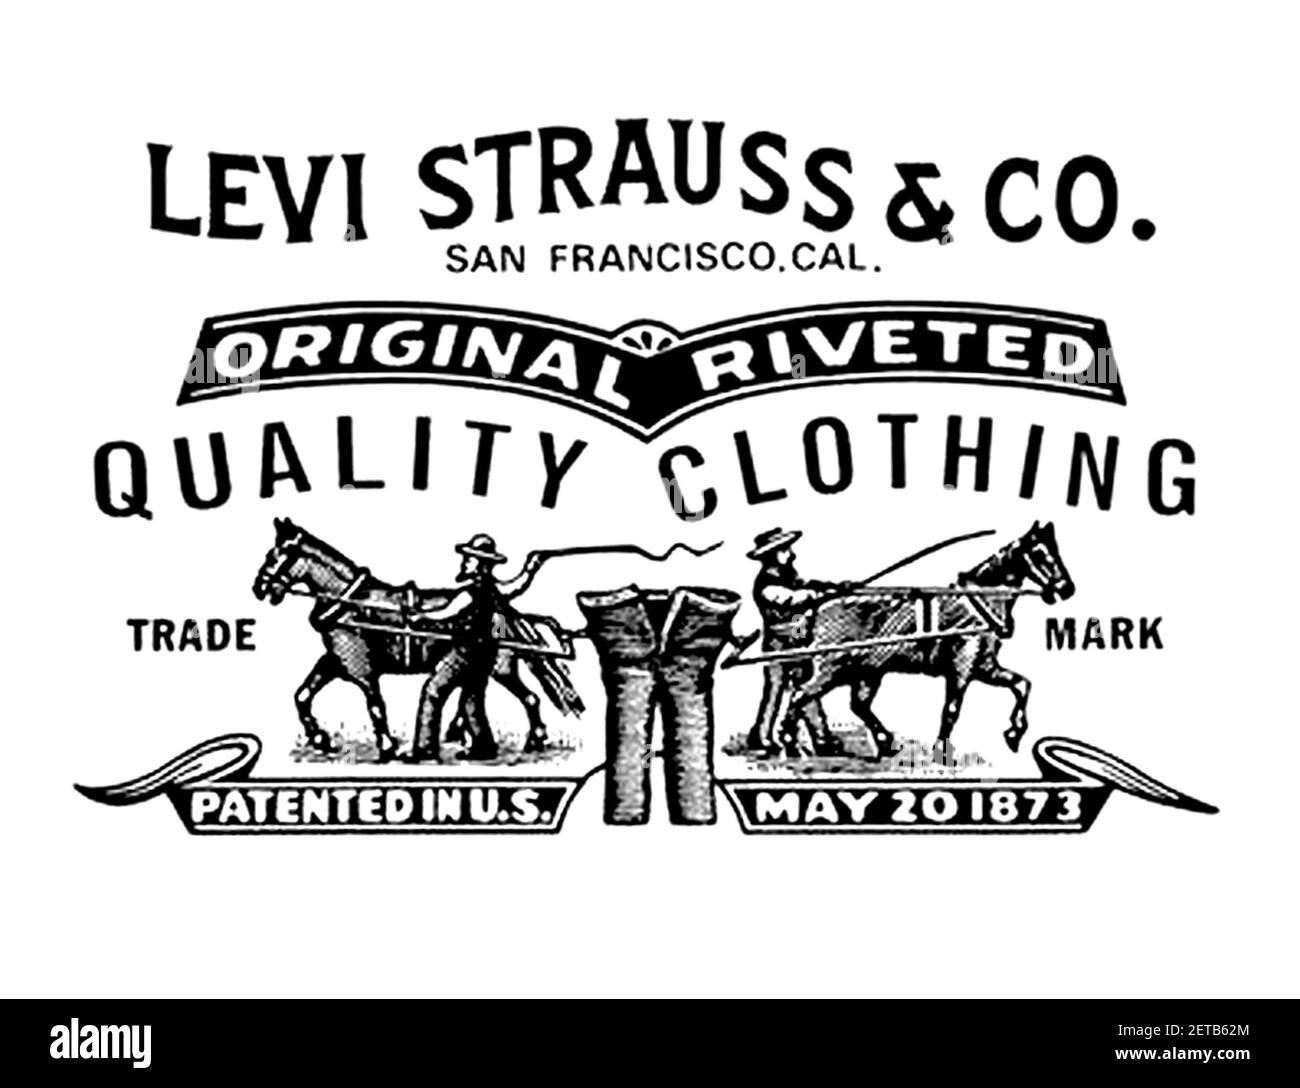 Levis Black and White Stock Photos & Images - Alamy